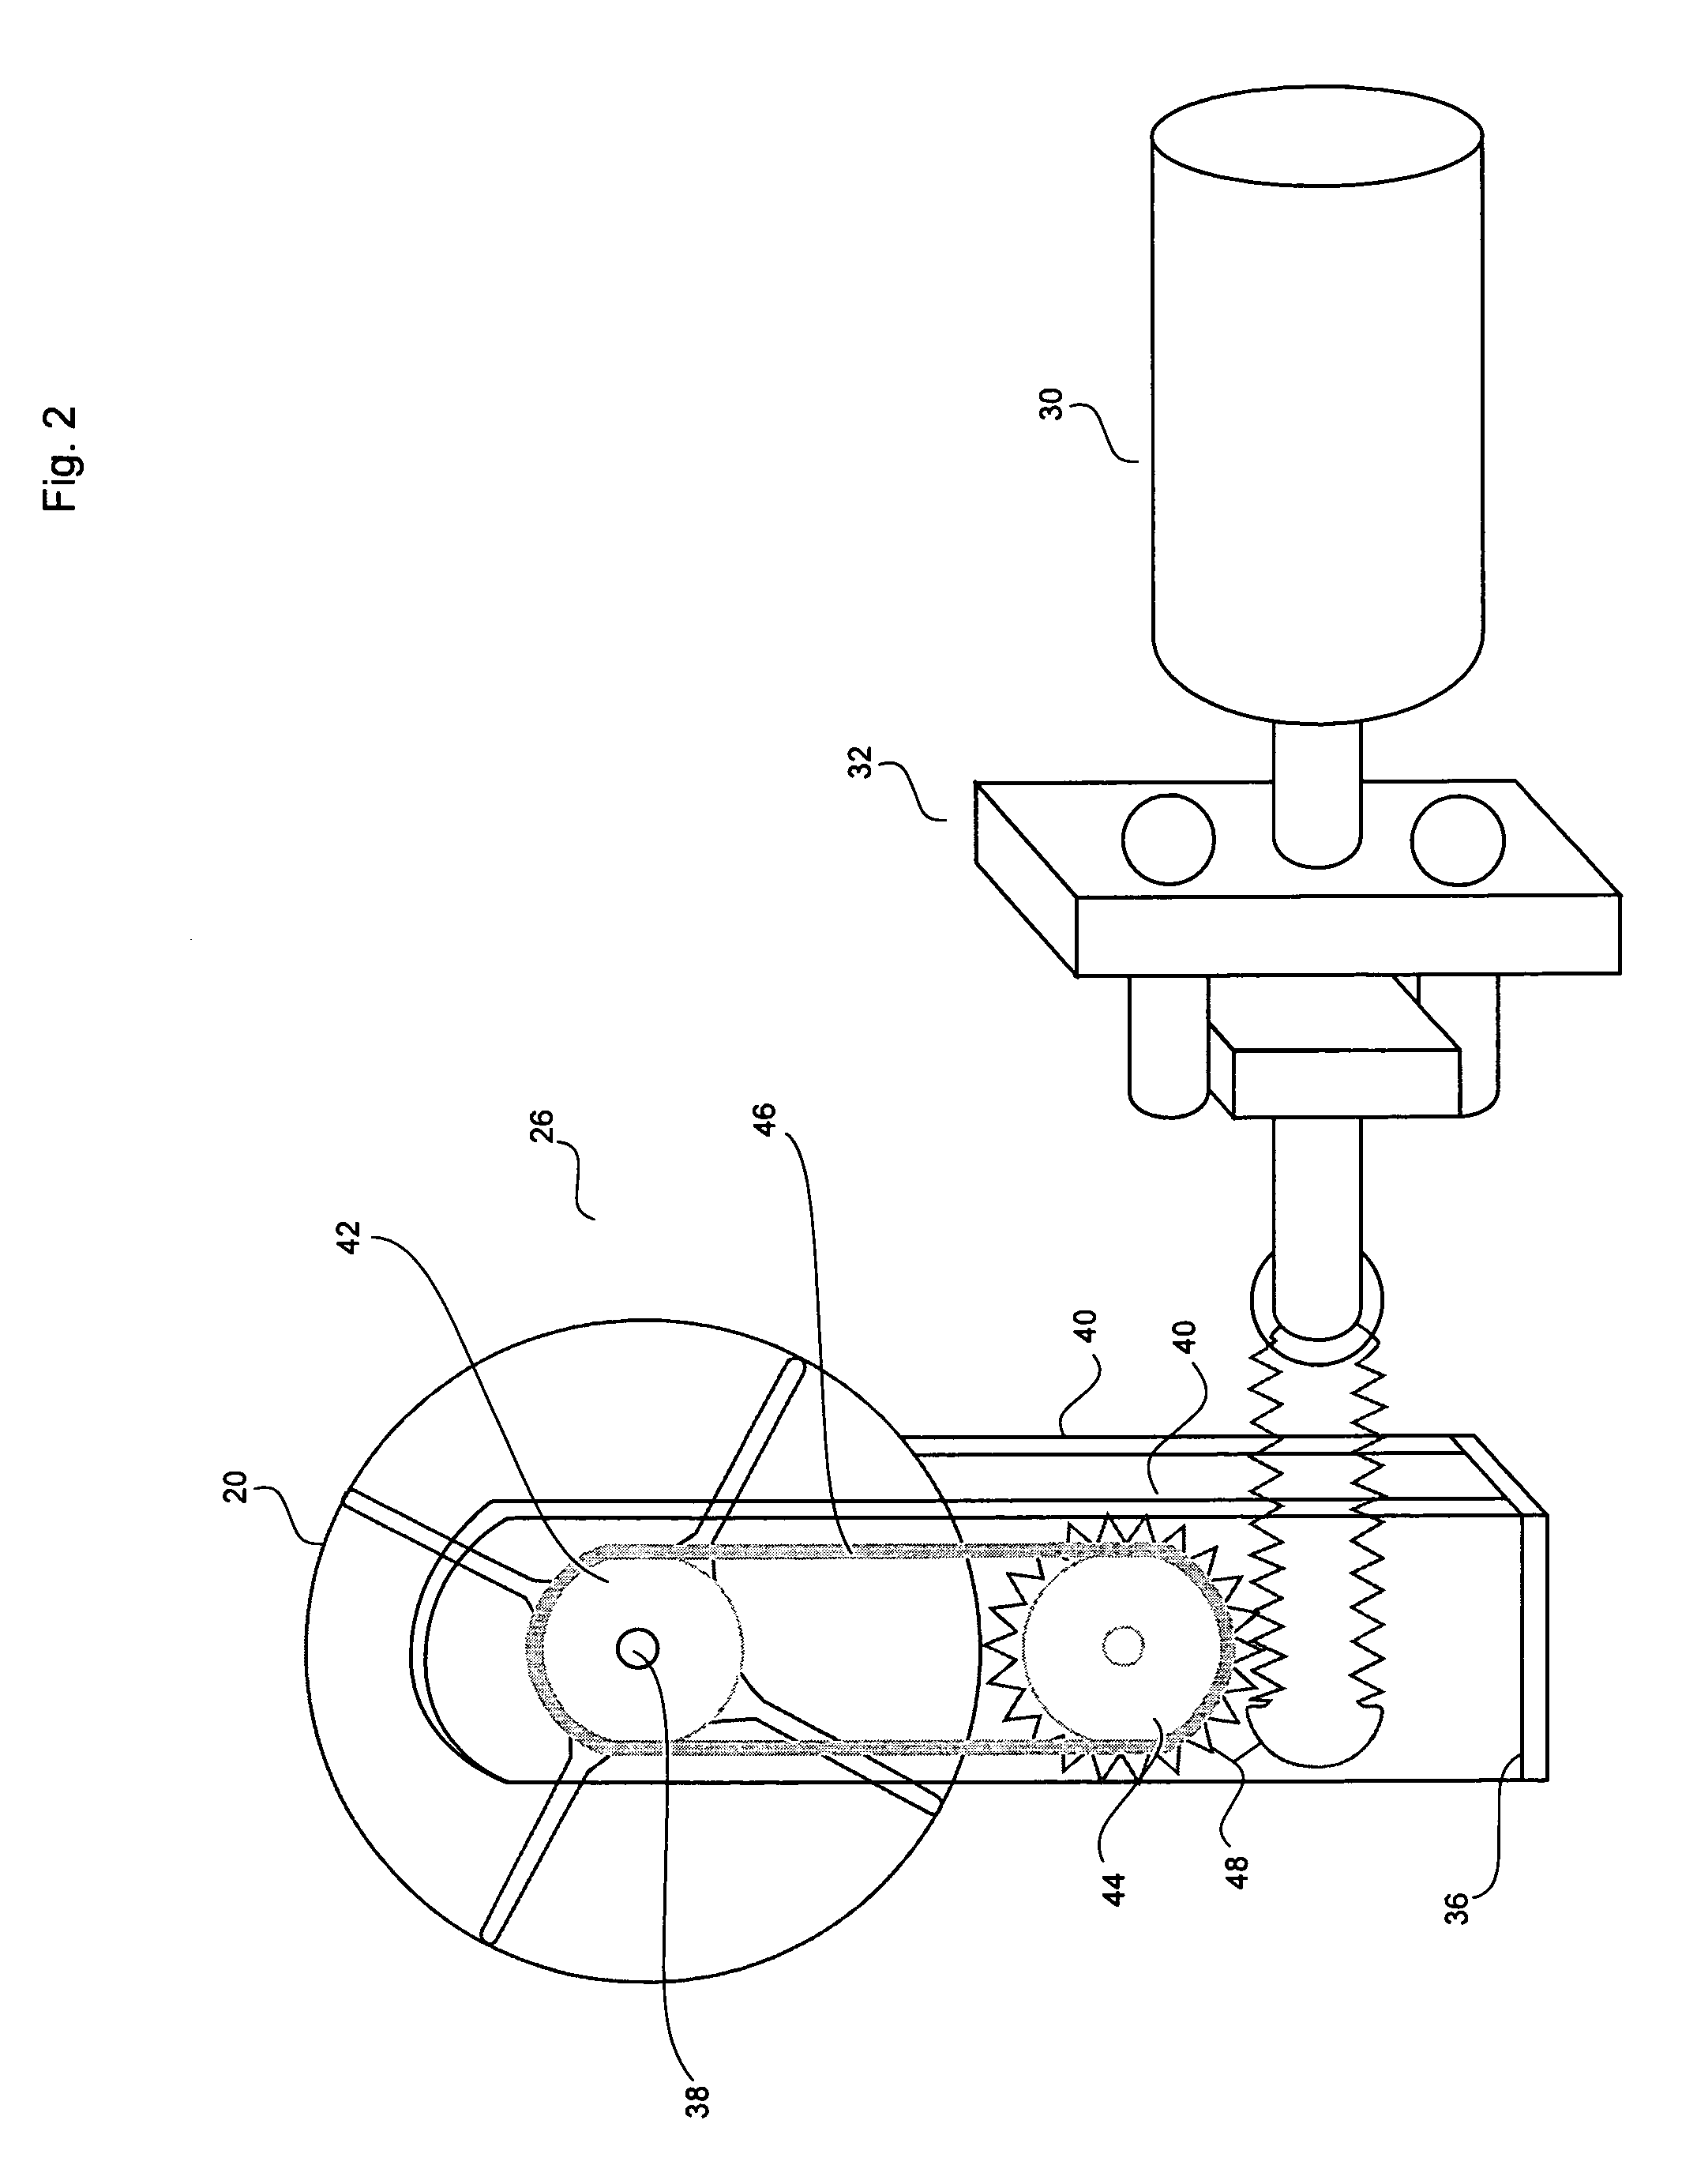 Method and apparatus for weighing divided portions